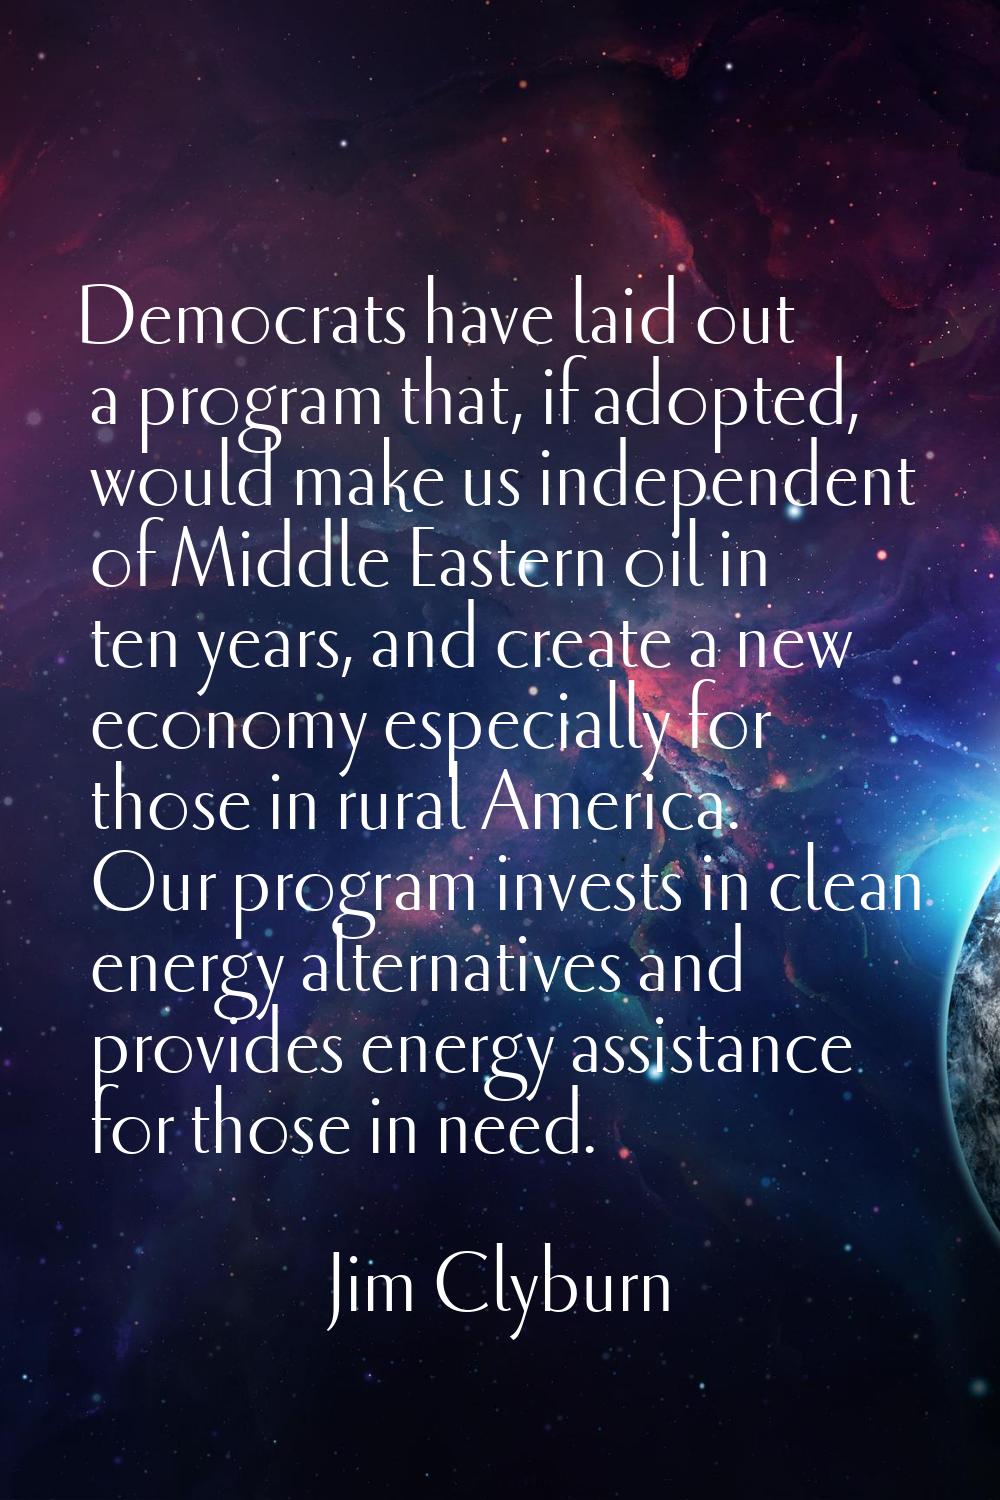 Democrats have laid out a program that, if adopted, would make us independent of Middle Eastern oil